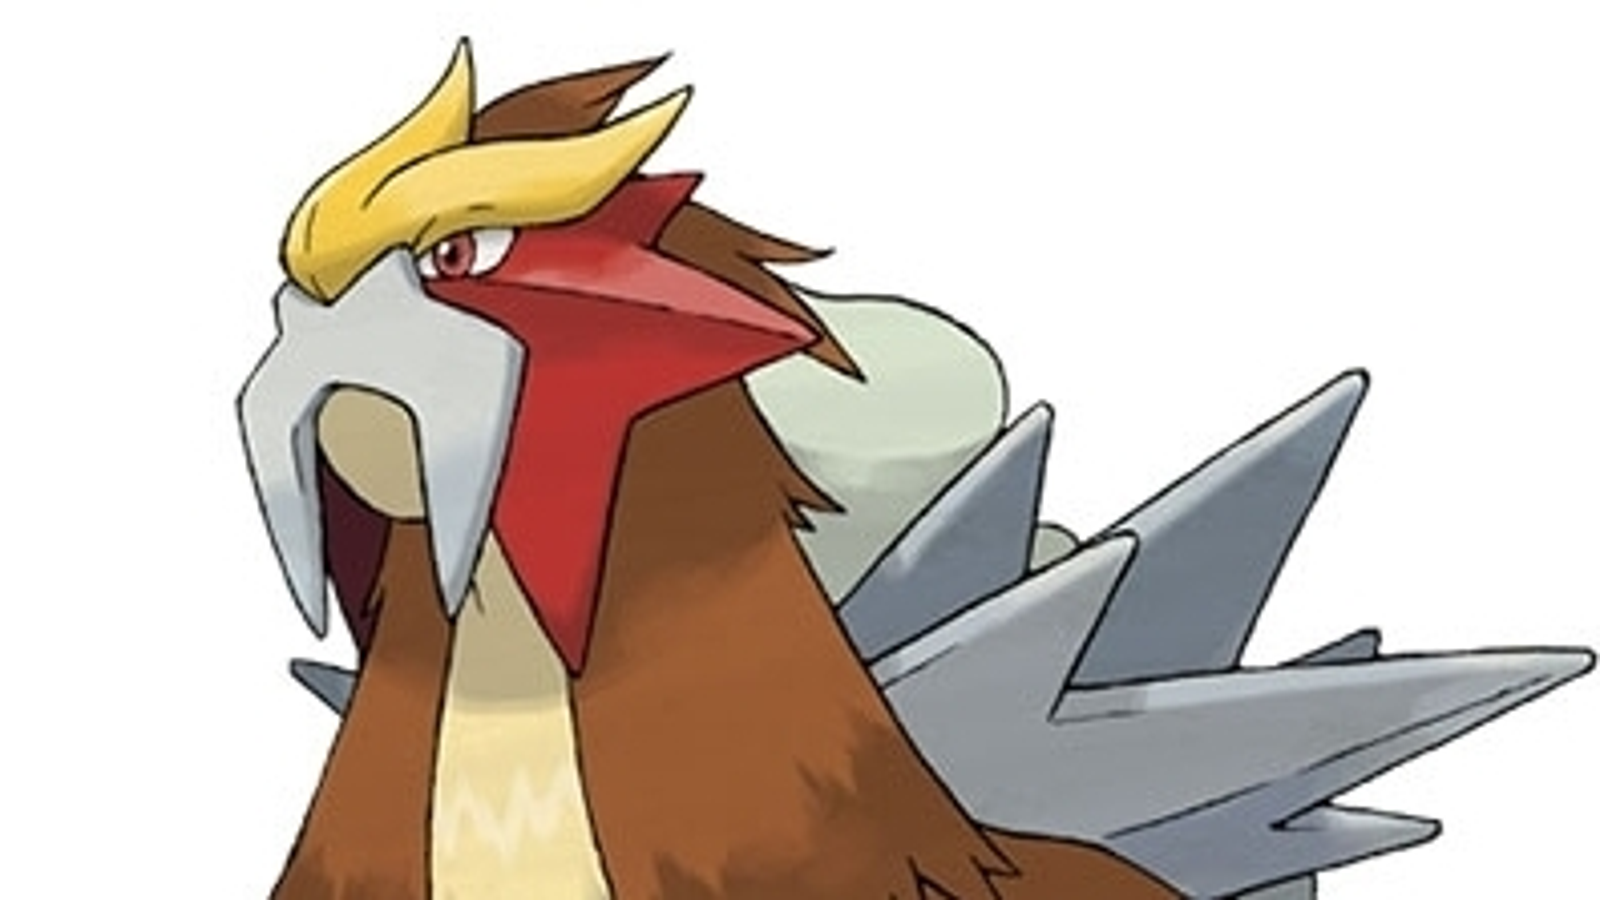 Pokémon Go Ho-oh counters, weaknesses and moveset explained